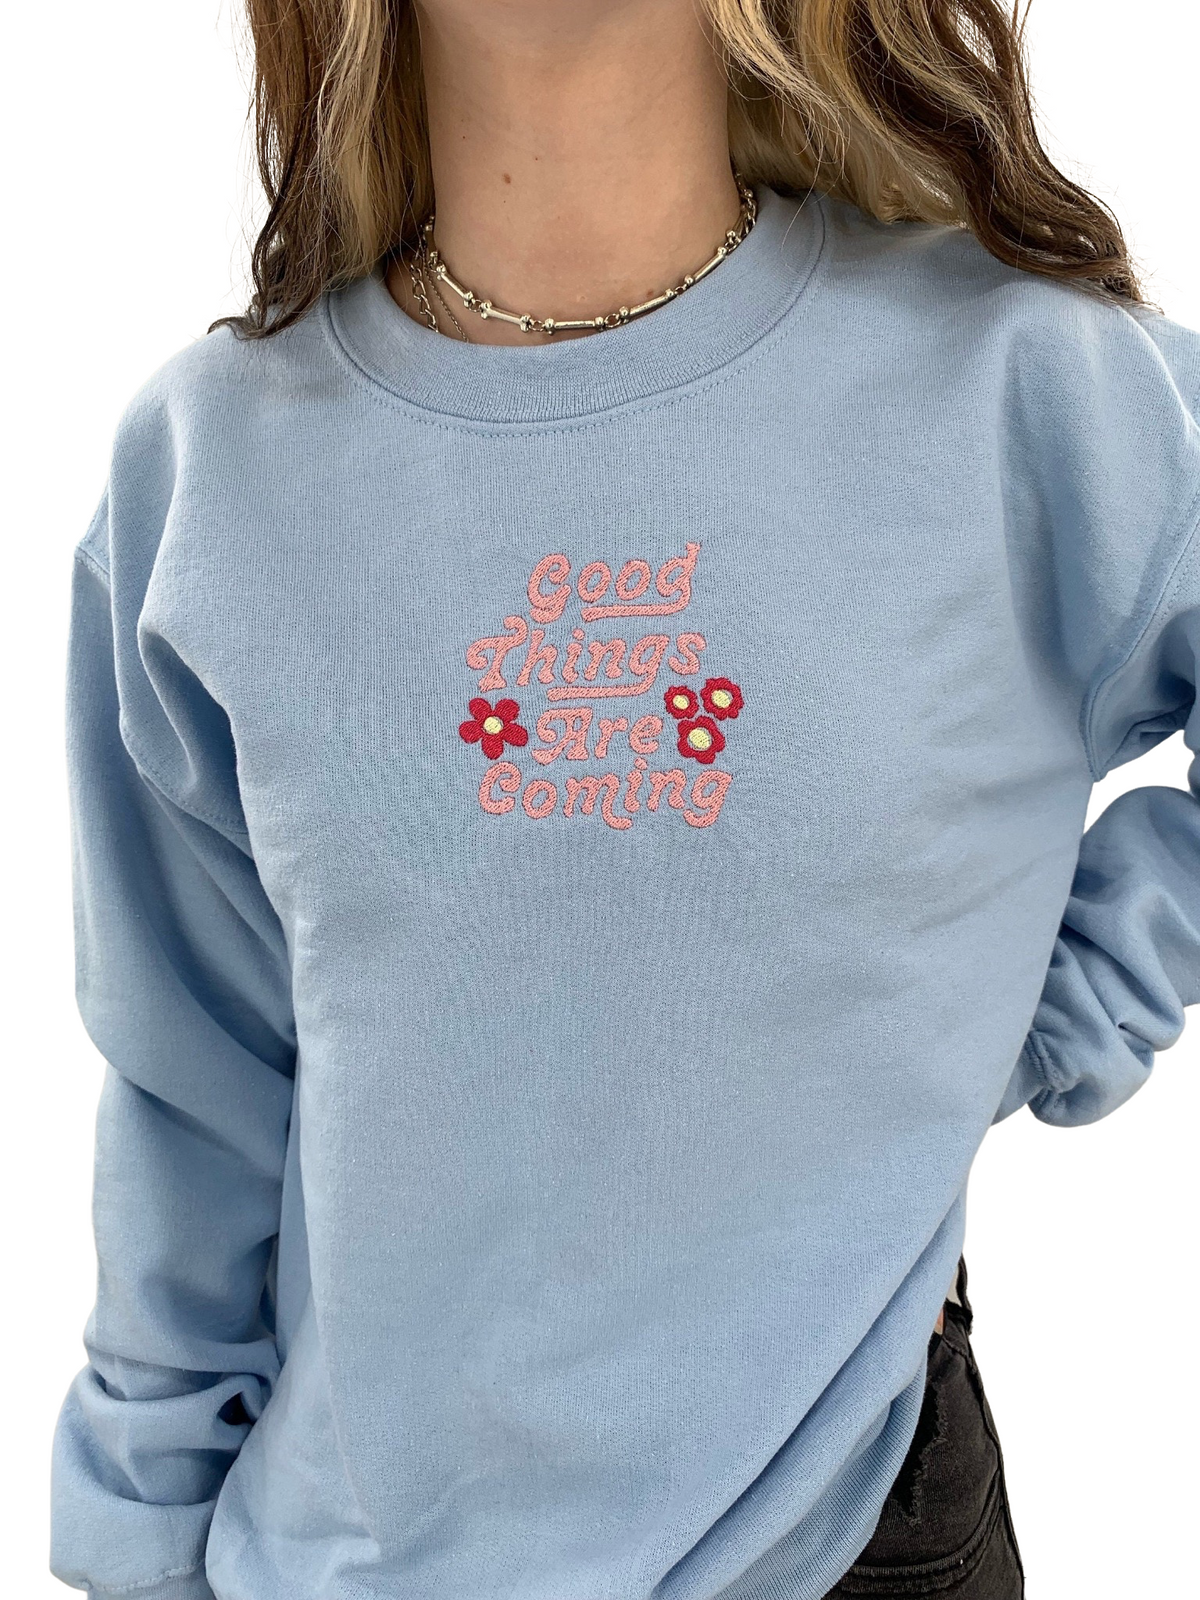 Good Things Are Coming Embroidered  Sweatshirt